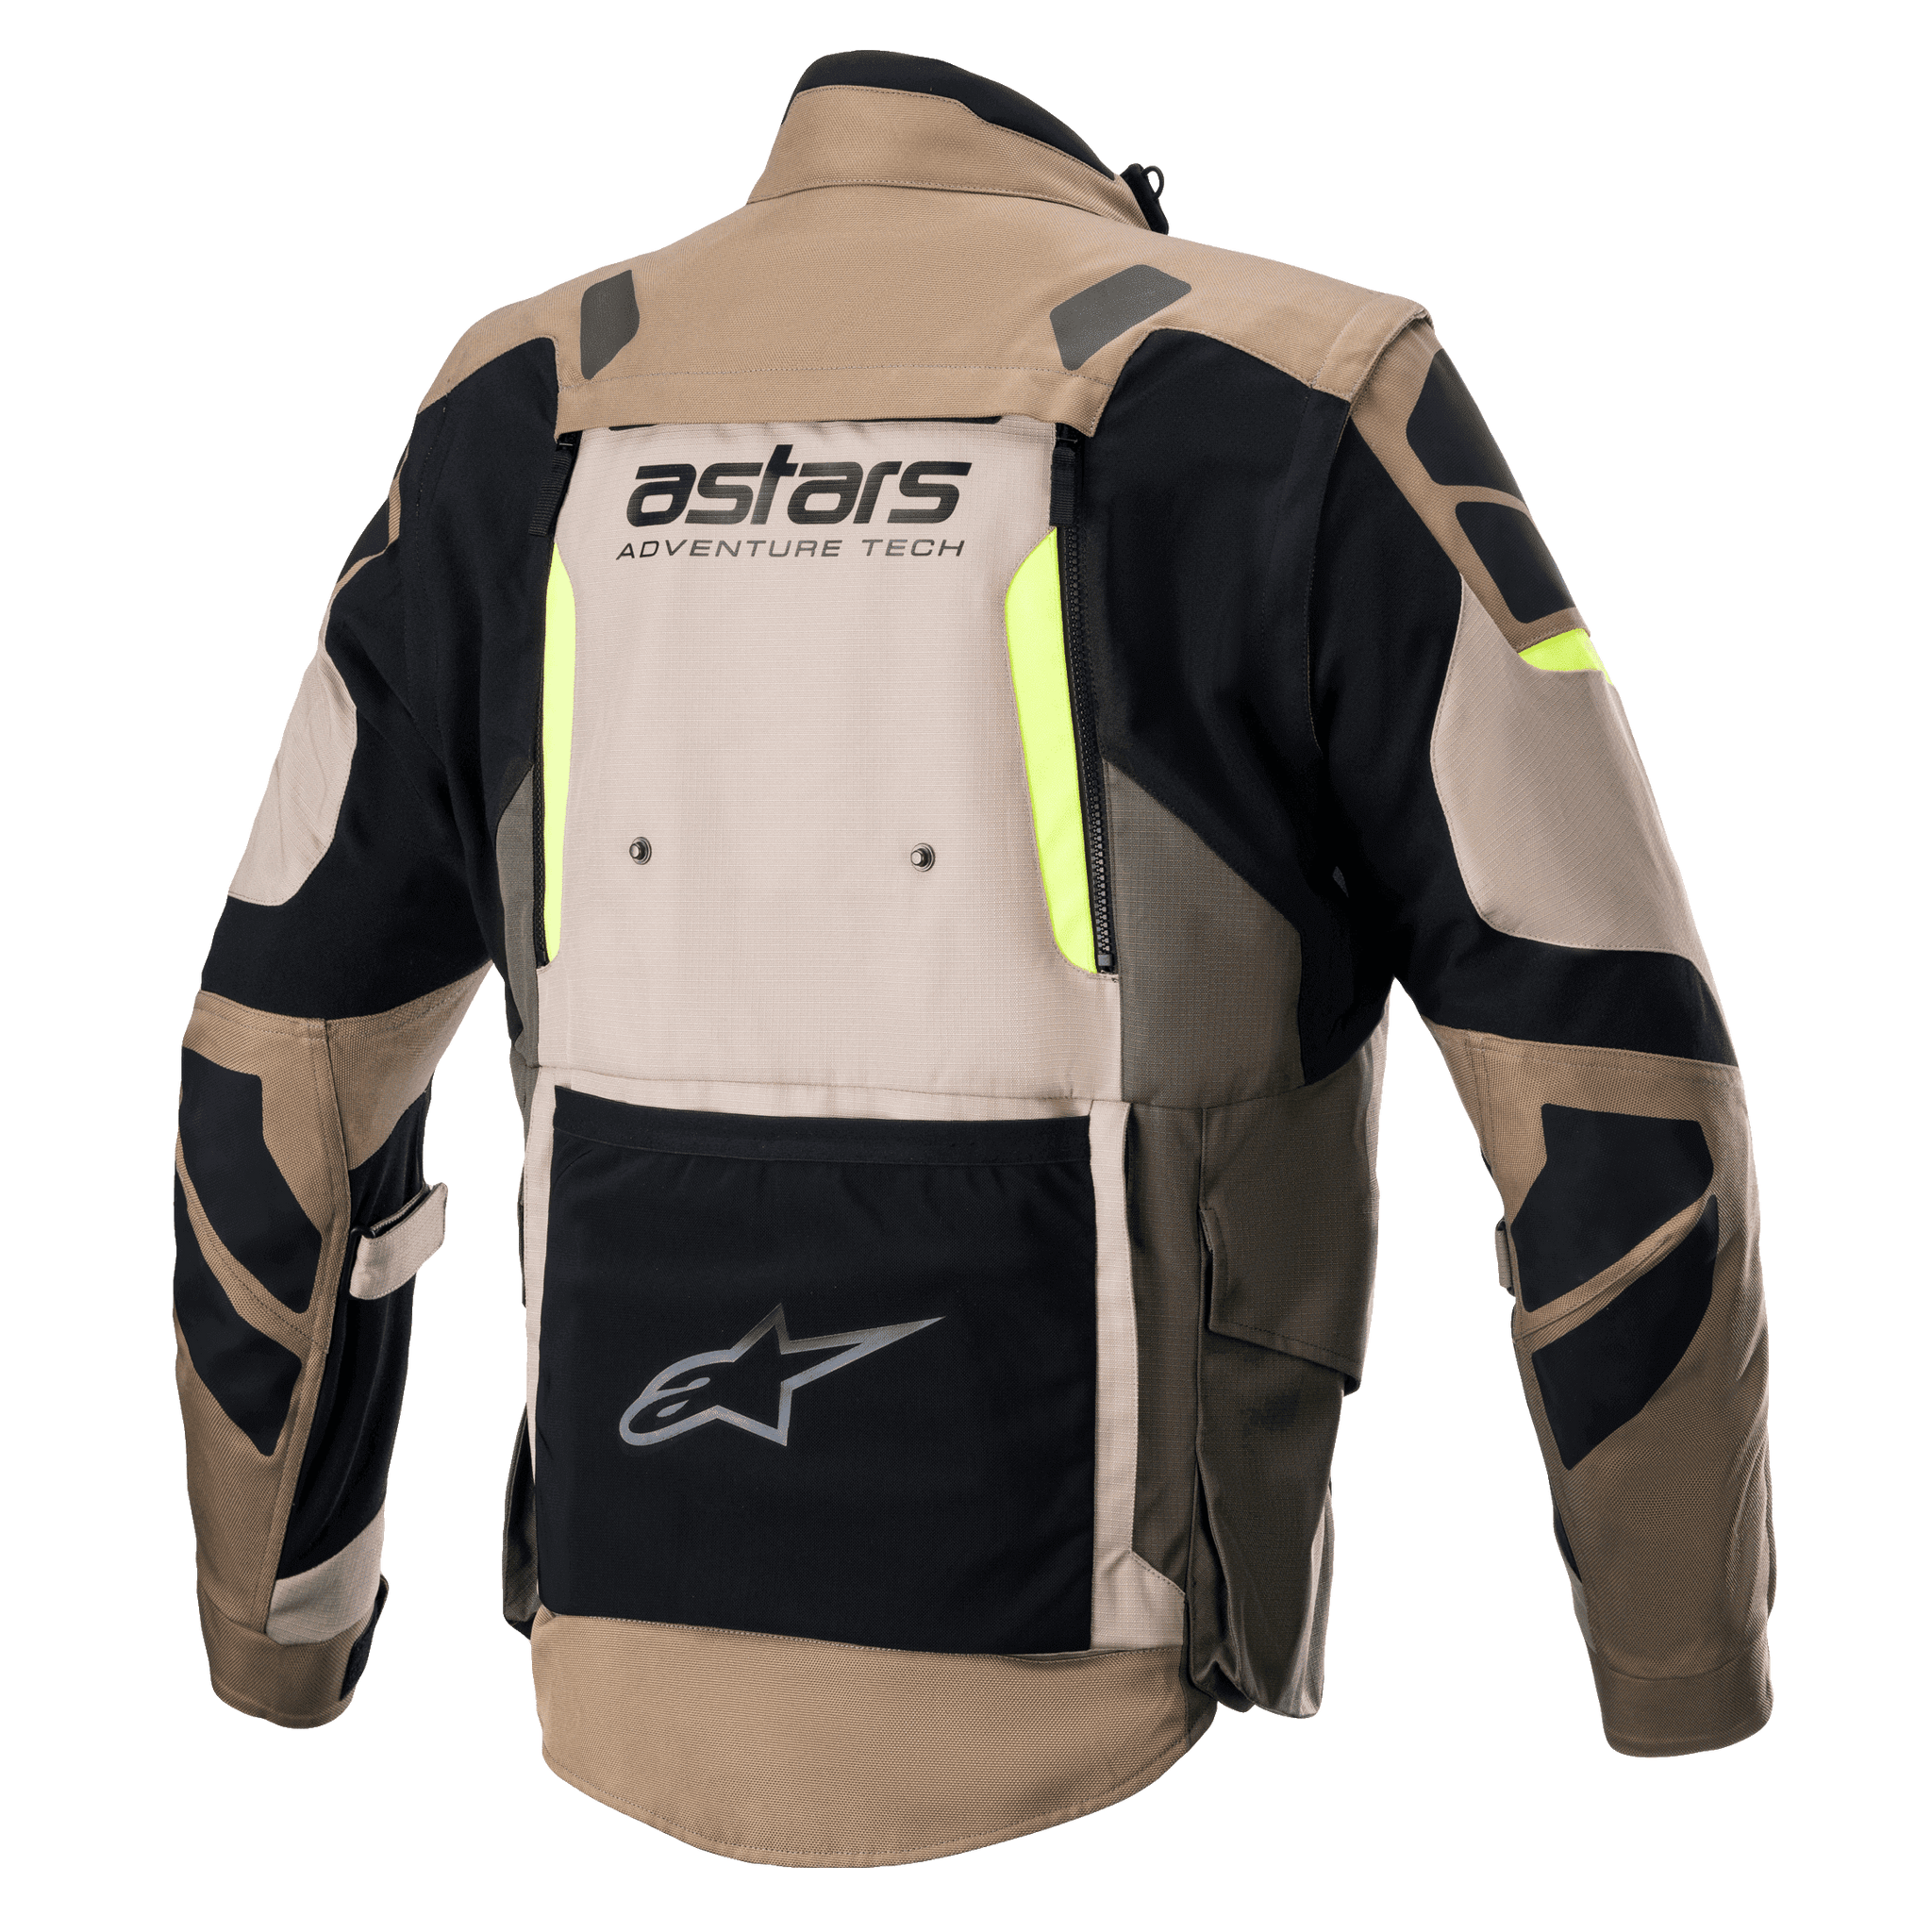 All Adventure Touring Products | Alpinestars® Official Site